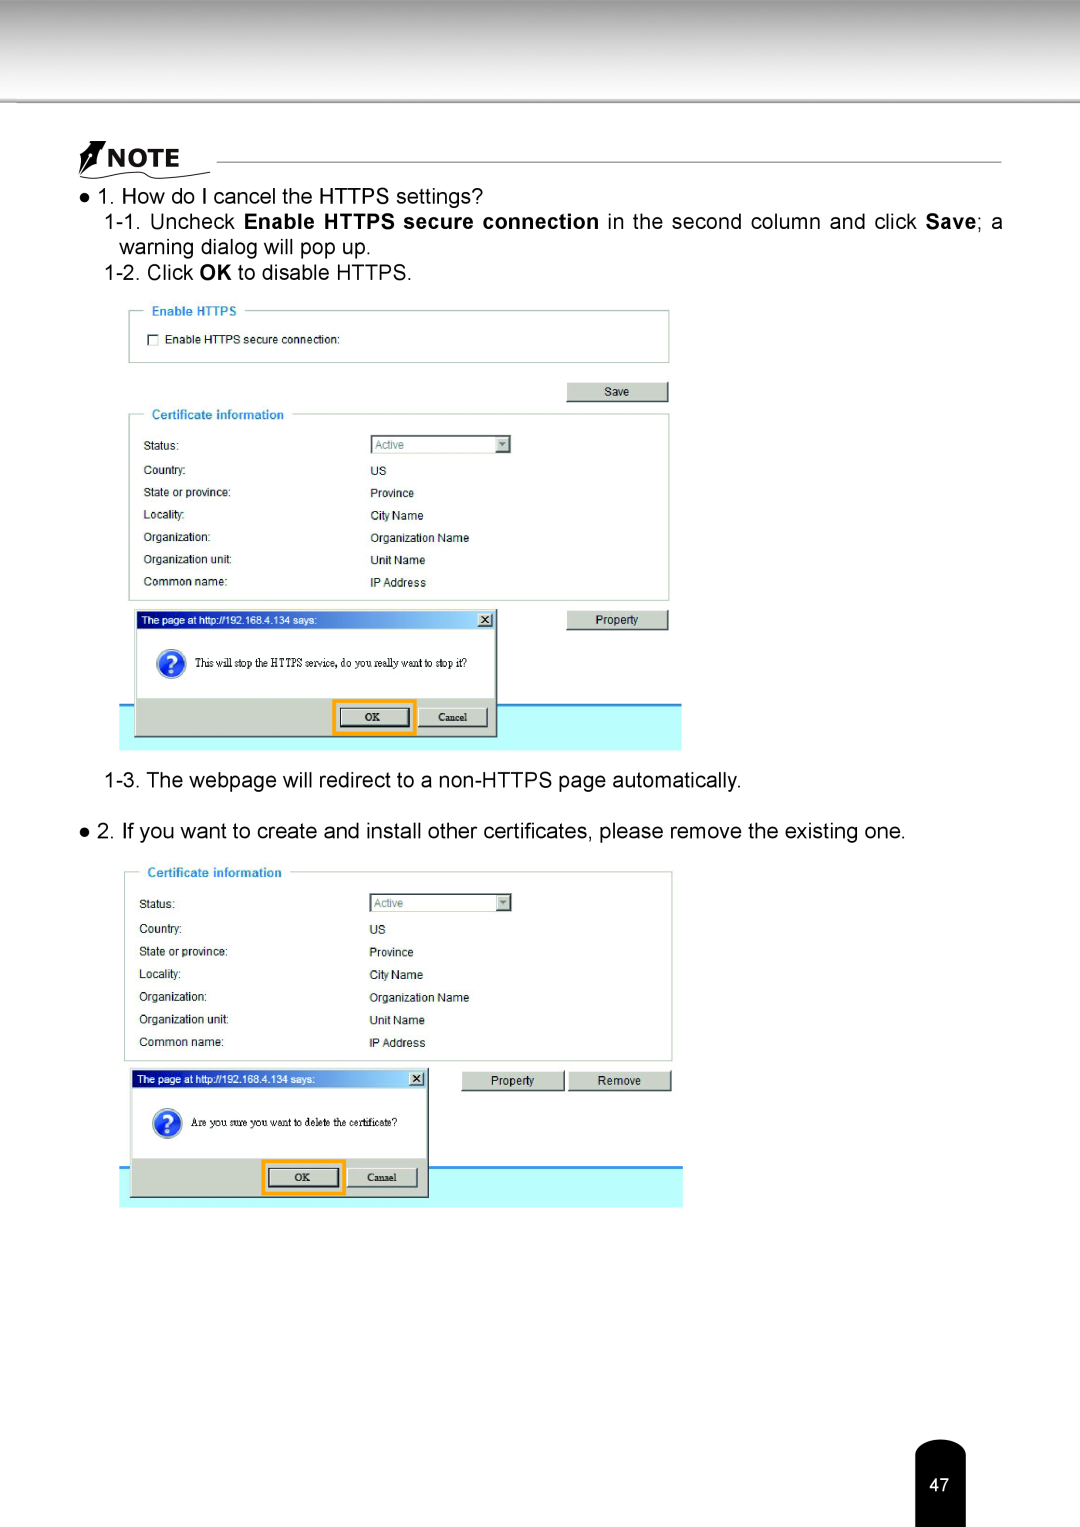 Toshiba IK-WR05A user manual How do I cancel the HTTPS settings?, Click OK to disable HTTPS 